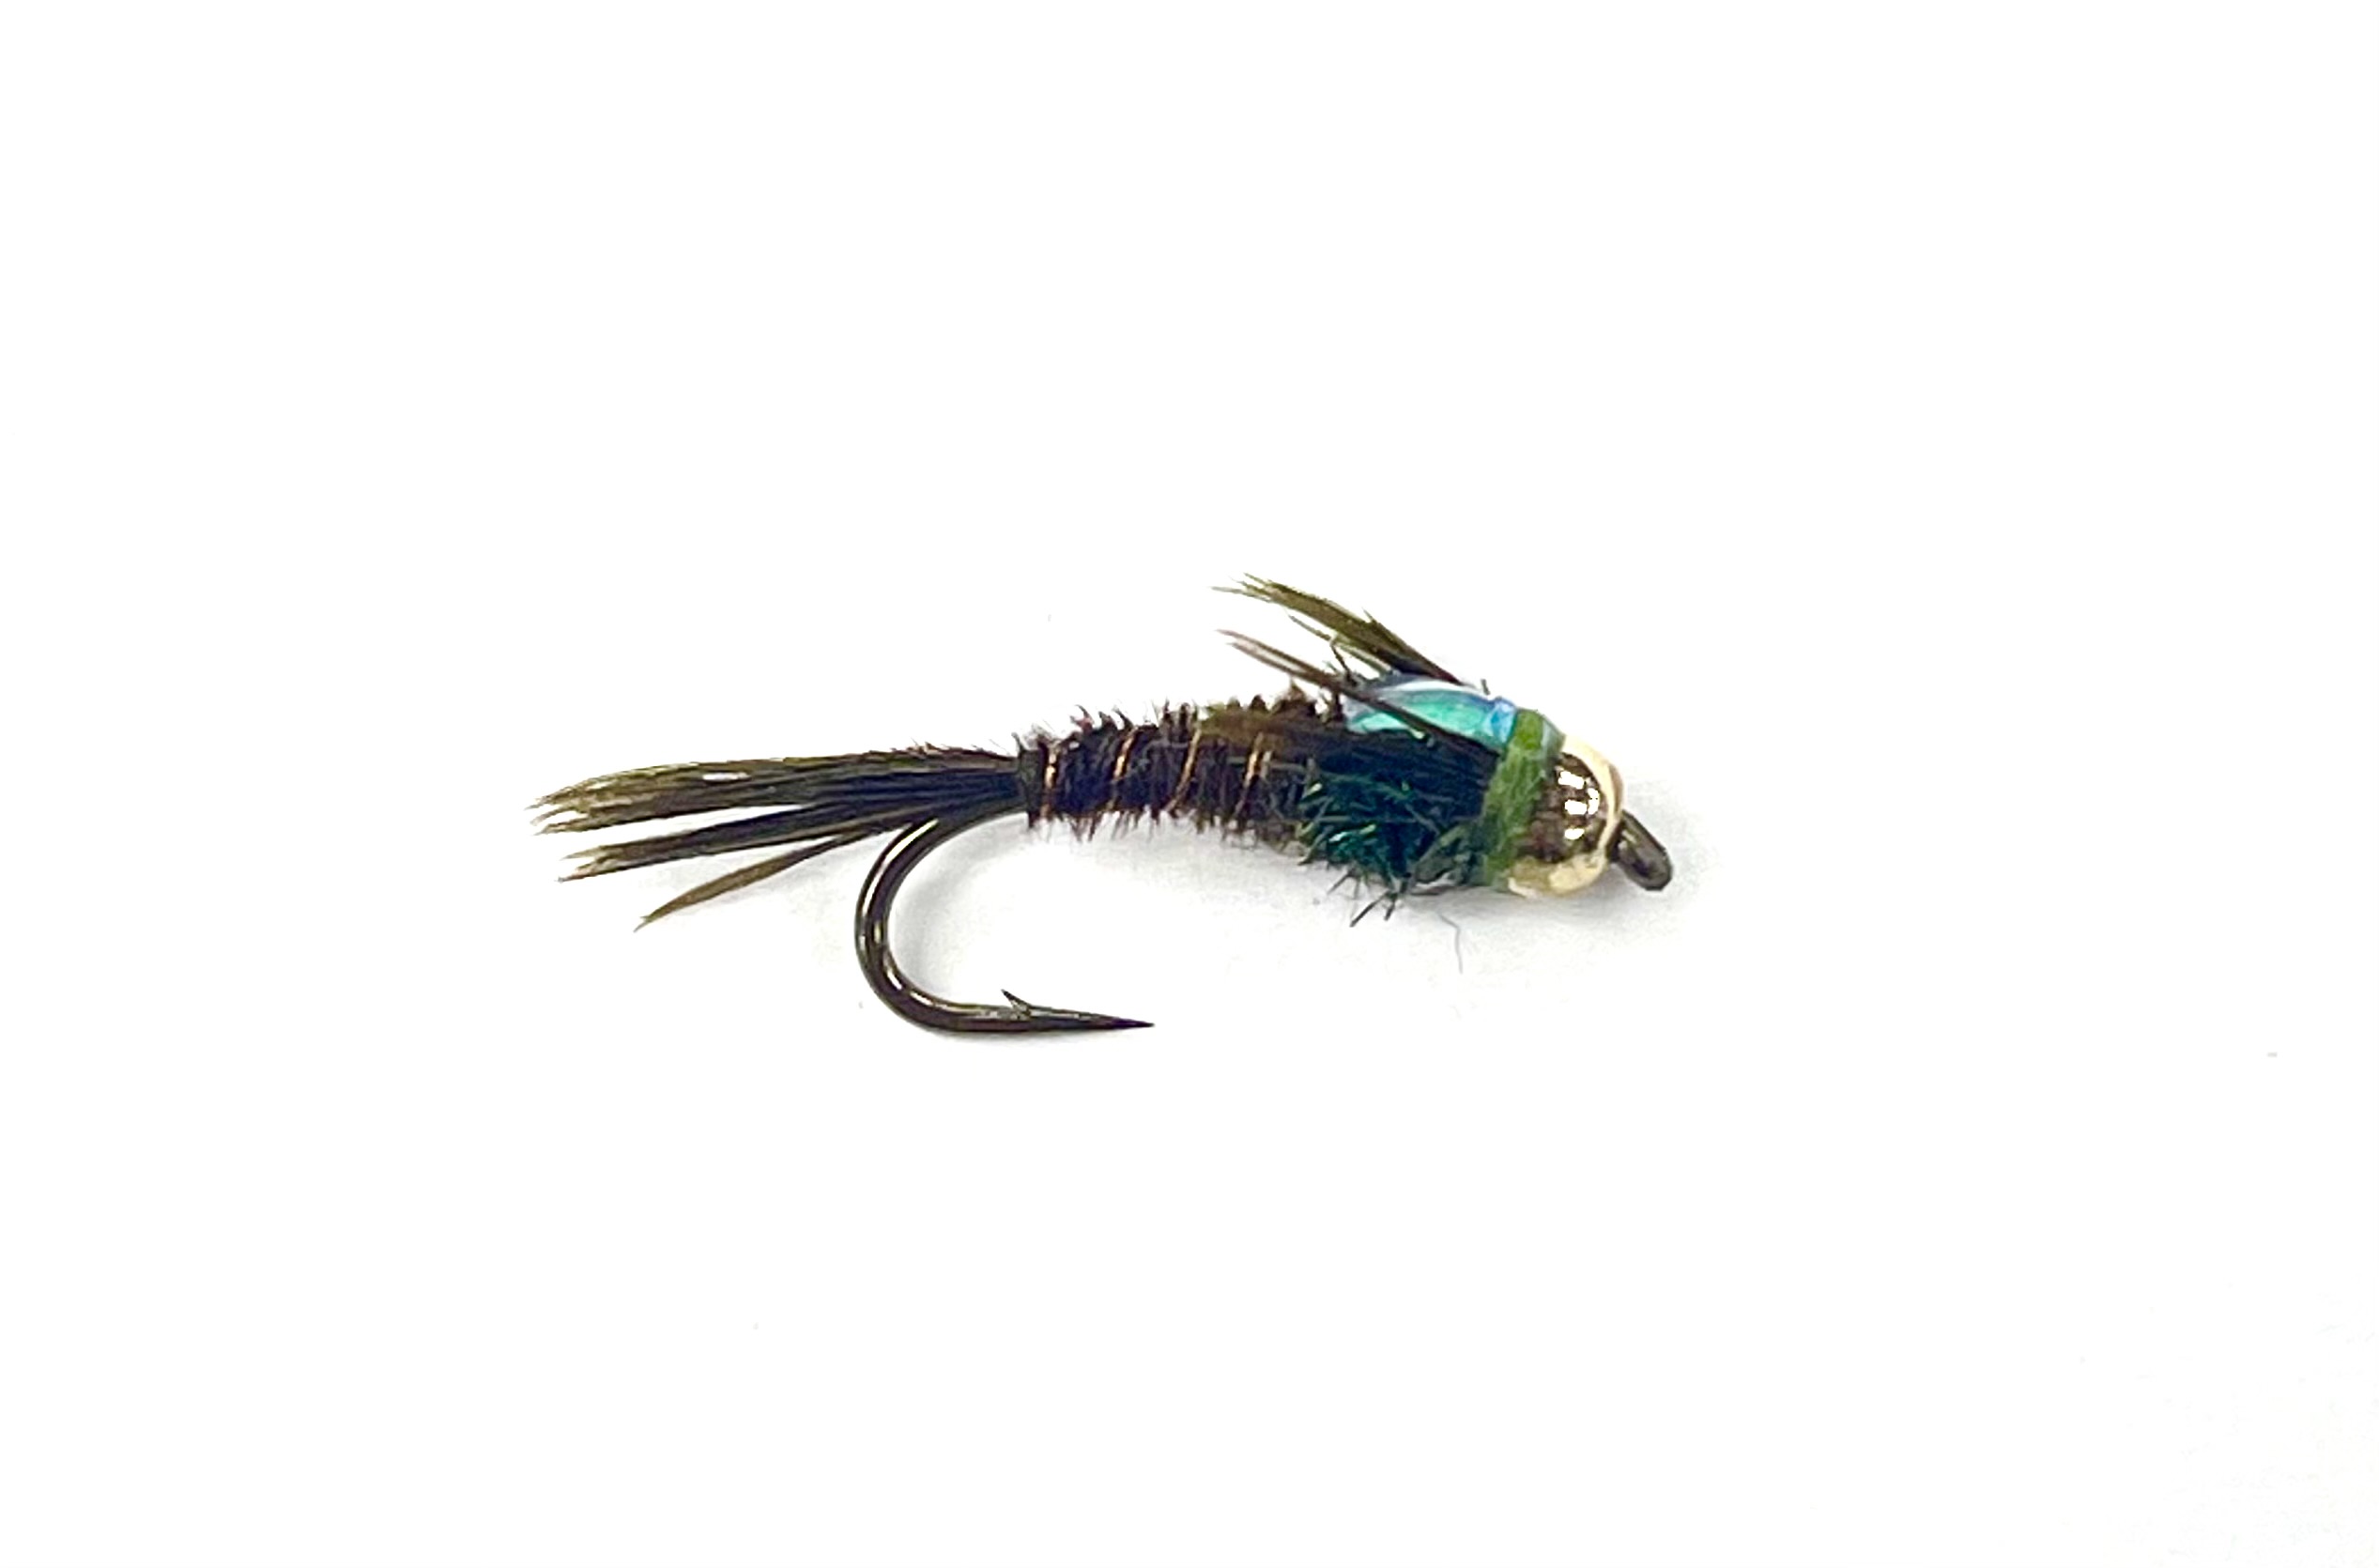 FAD GB Flashback Pheasant Tail Nymph - Olive - Size 16